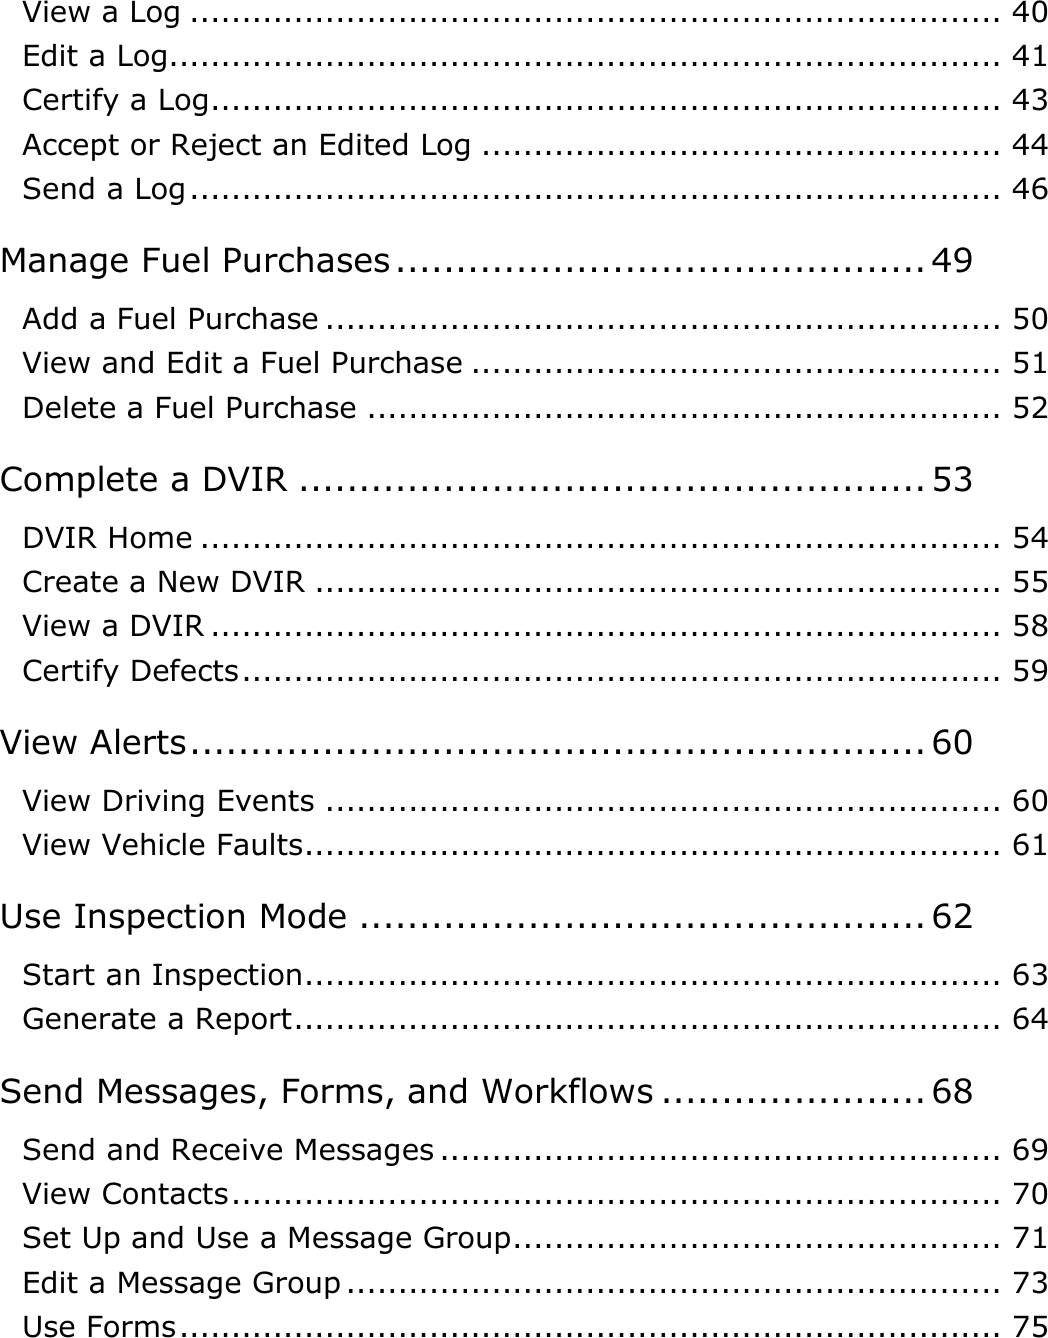 Table of Contents: How Do I…? DriverConnect User Guide  3 © 2016-2017, Rand McNally, Inc. View a Log .............................................................................. 40 Edit a Log................................................................................ 41 Certify a Log ............................................................................ 43 Accept or Reject an Edited Log .................................................. 44 Send a Log .............................................................................. 46 Manage Fuel Purchases ............................................ 49 Add a Fuel Purchase ................................................................. 50 View and Edit a Fuel Purchase ................................................... 51 Delete a Fuel Purchase ............................................................. 52 Complete a DVIR .................................................... 53 DVIR Home ............................................................................. 54 Create a New DVIR .................................................................. 55 View a DVIR ............................................................................ 58 Certify Defects ......................................................................... 59 View Alerts ............................................................. 60 View Driving Events ................................................................. 60 View Vehicle Faults................................................................... 61 Use Inspection Mode ............................................... 62 Start an Inspection................................................................... 63 Generate a Report .................................................................... 64 Send Messages, Forms, and Workflows ...................... 68 Send and Receive Messages ...................................................... 69 View Contacts .......................................................................... 70 Set Up and Use a Message Group............................................... 71 Edit a Message Group ............................................................... 73 Use Forms ............................................................................... 75 